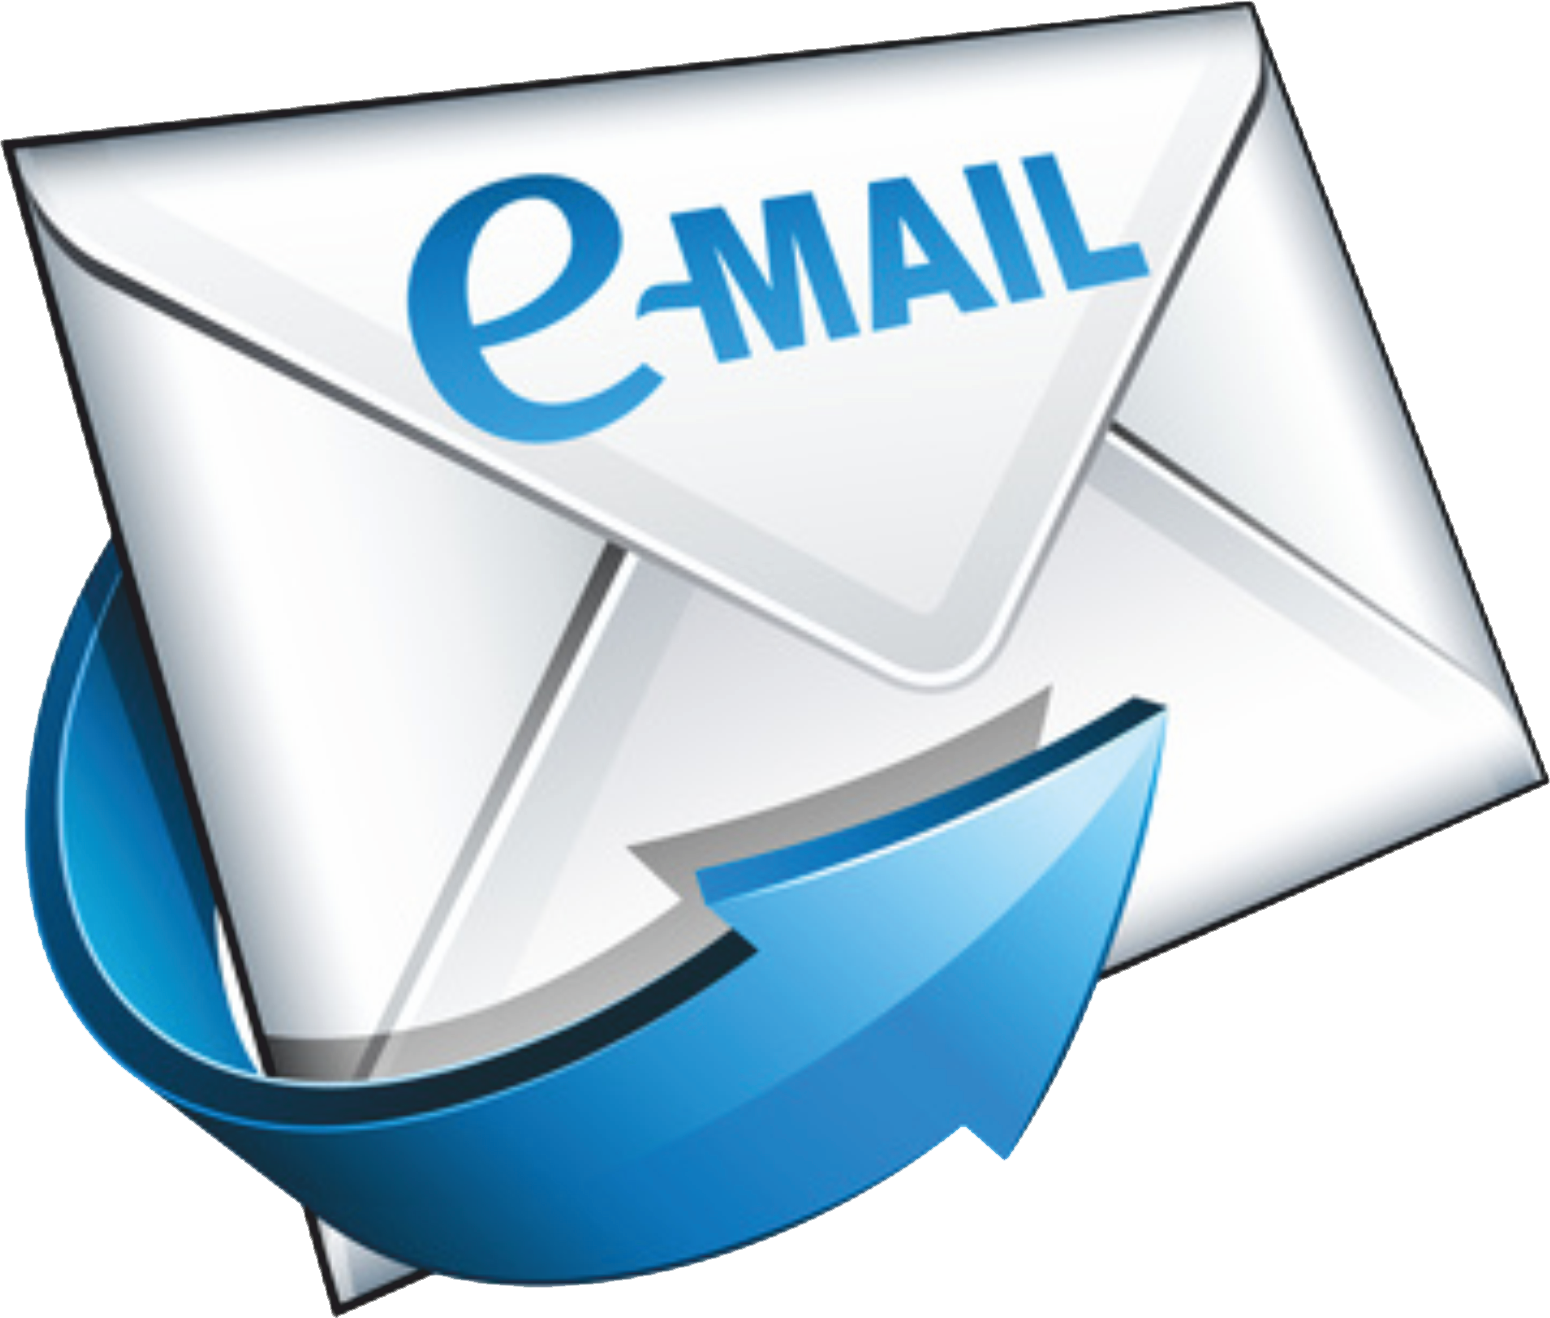 Box Forwarding Gmail Email Address Free Download PNG HQ PNG Image